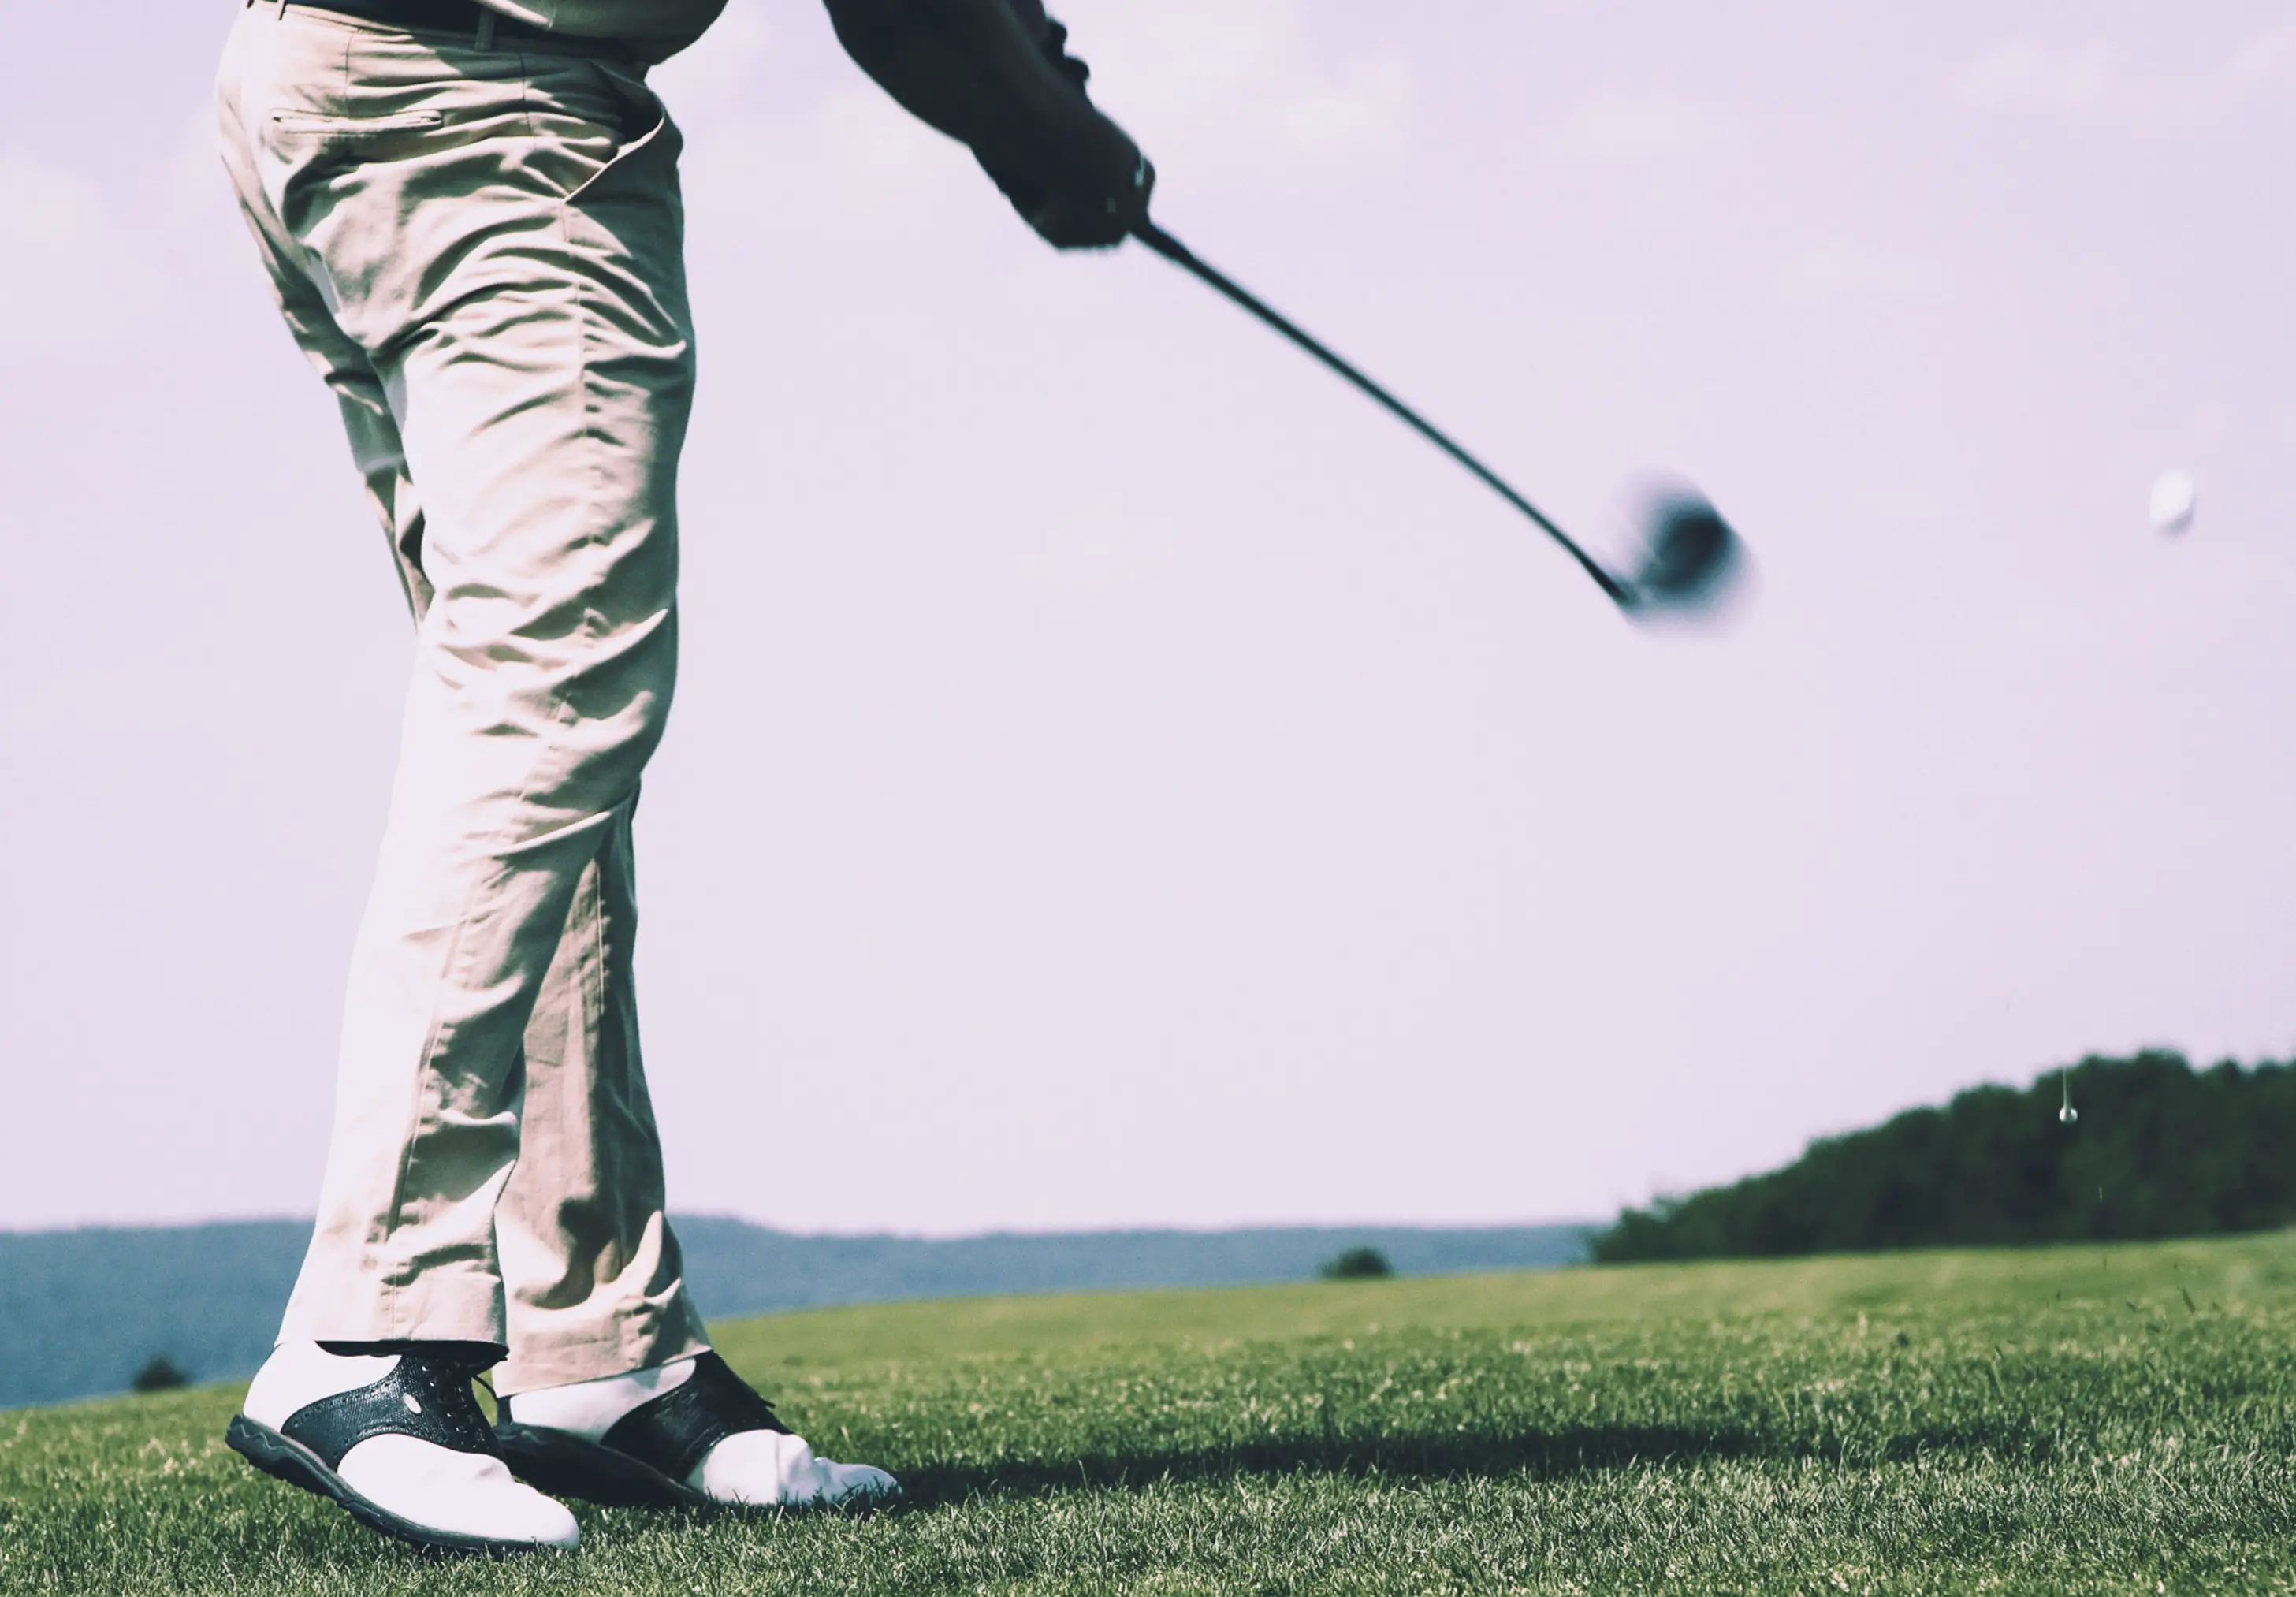 Tips For Buying Men’s Golf Clothing | GolfReviewsGuide.com